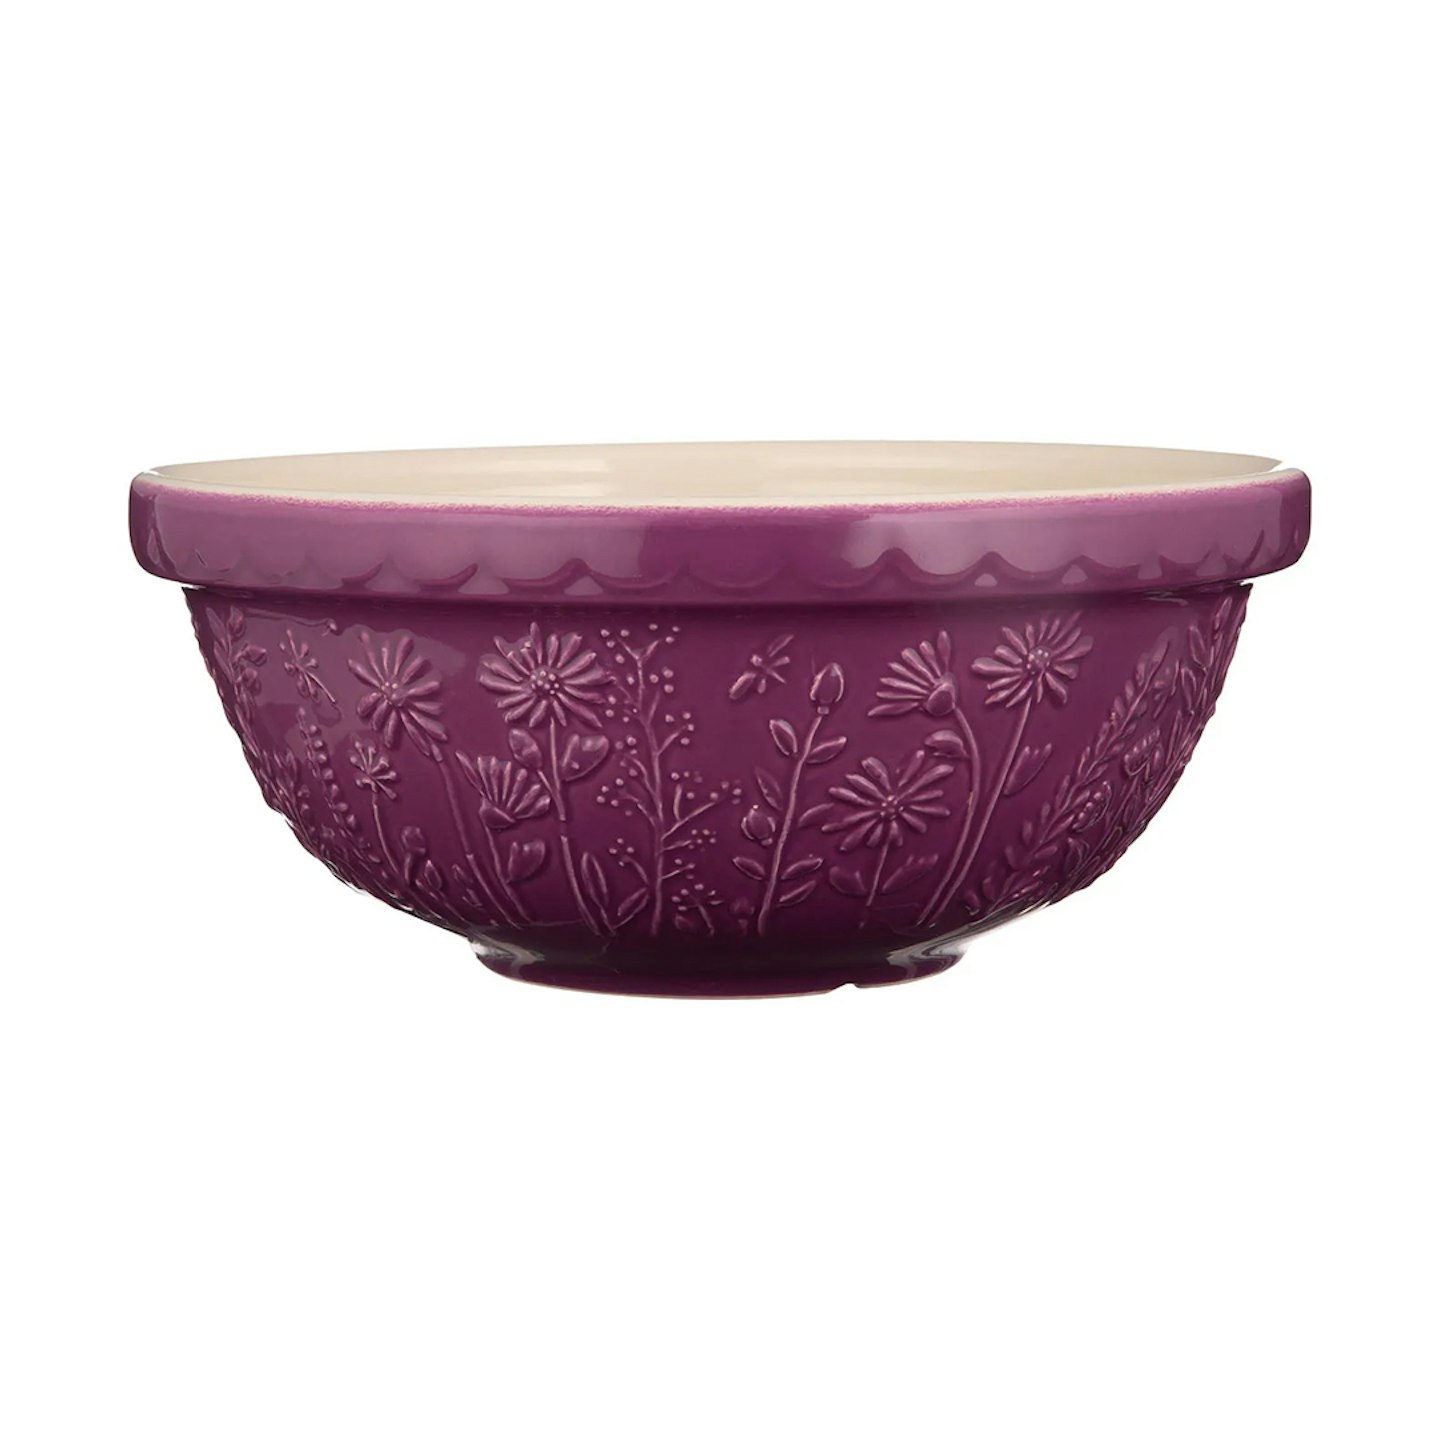 In The Meadow S18 Daisy Mixing Bowl 26cm